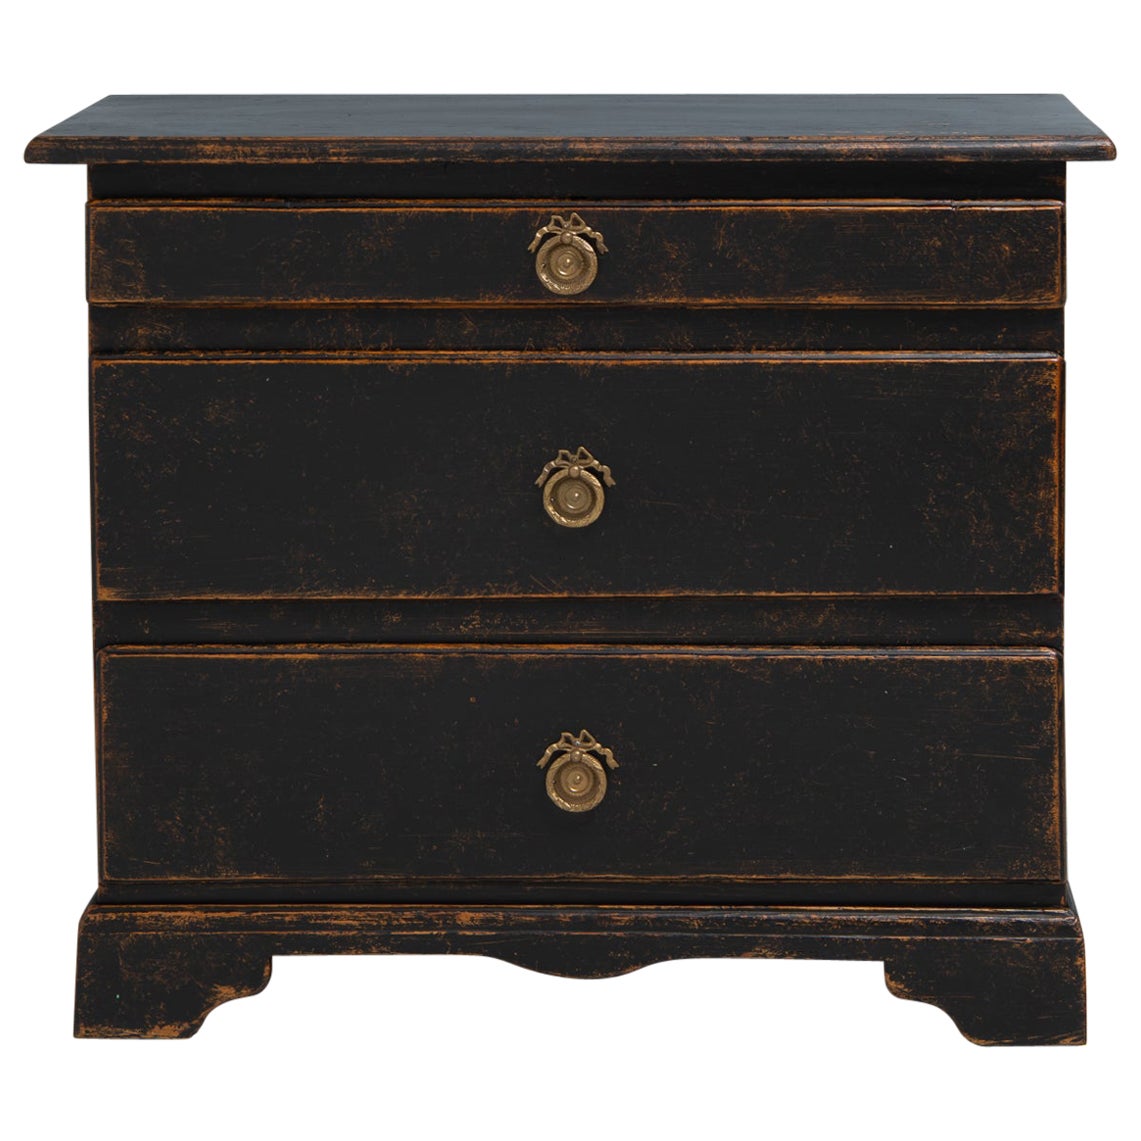 Small Black Swedish Baroque Chest of Drawers